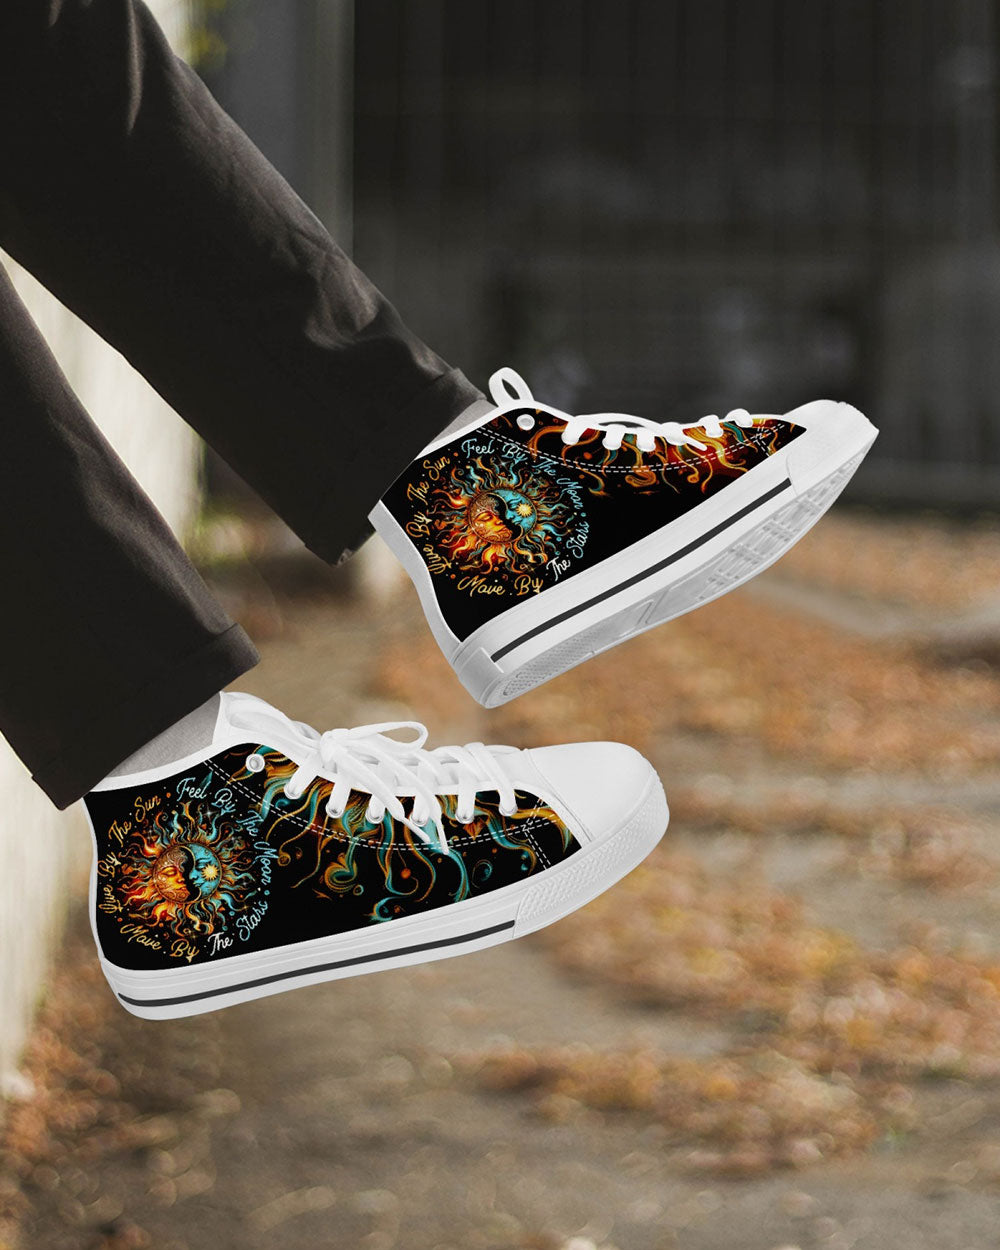 LIVE BY THE SUN HIGH TOP CANVAS SHOES - TY0403235